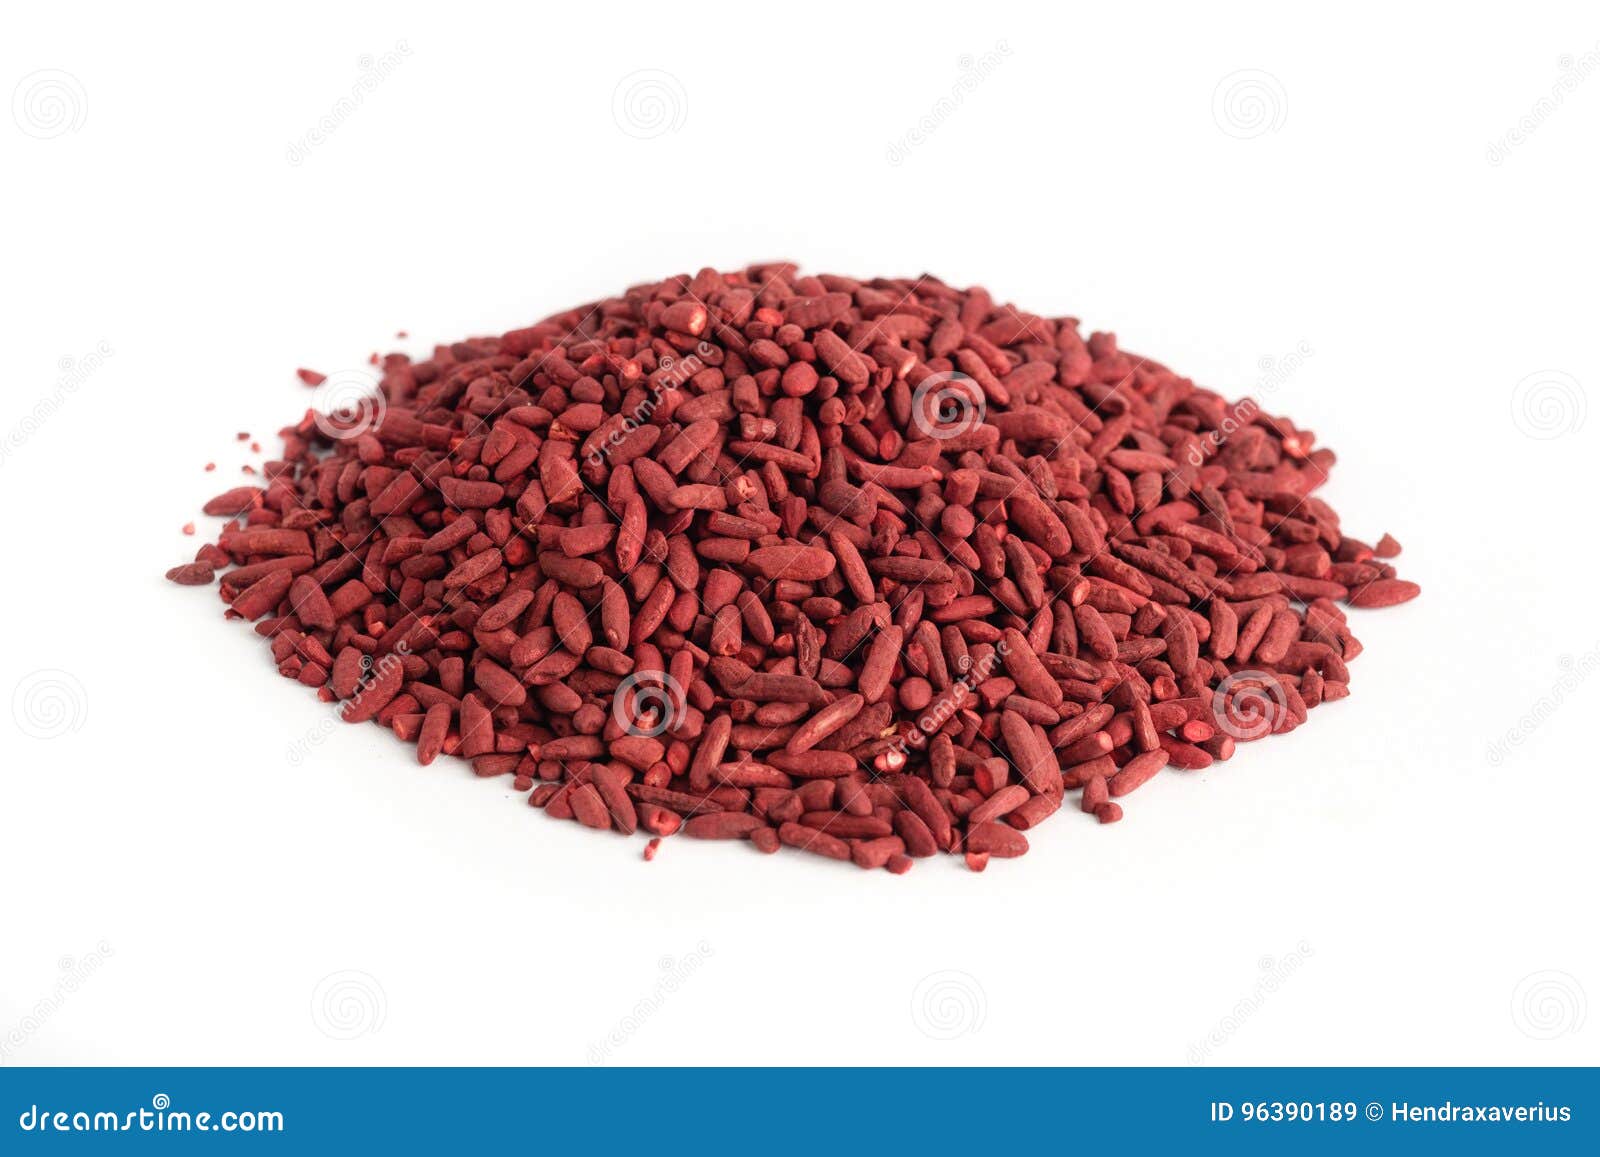 Red yeast